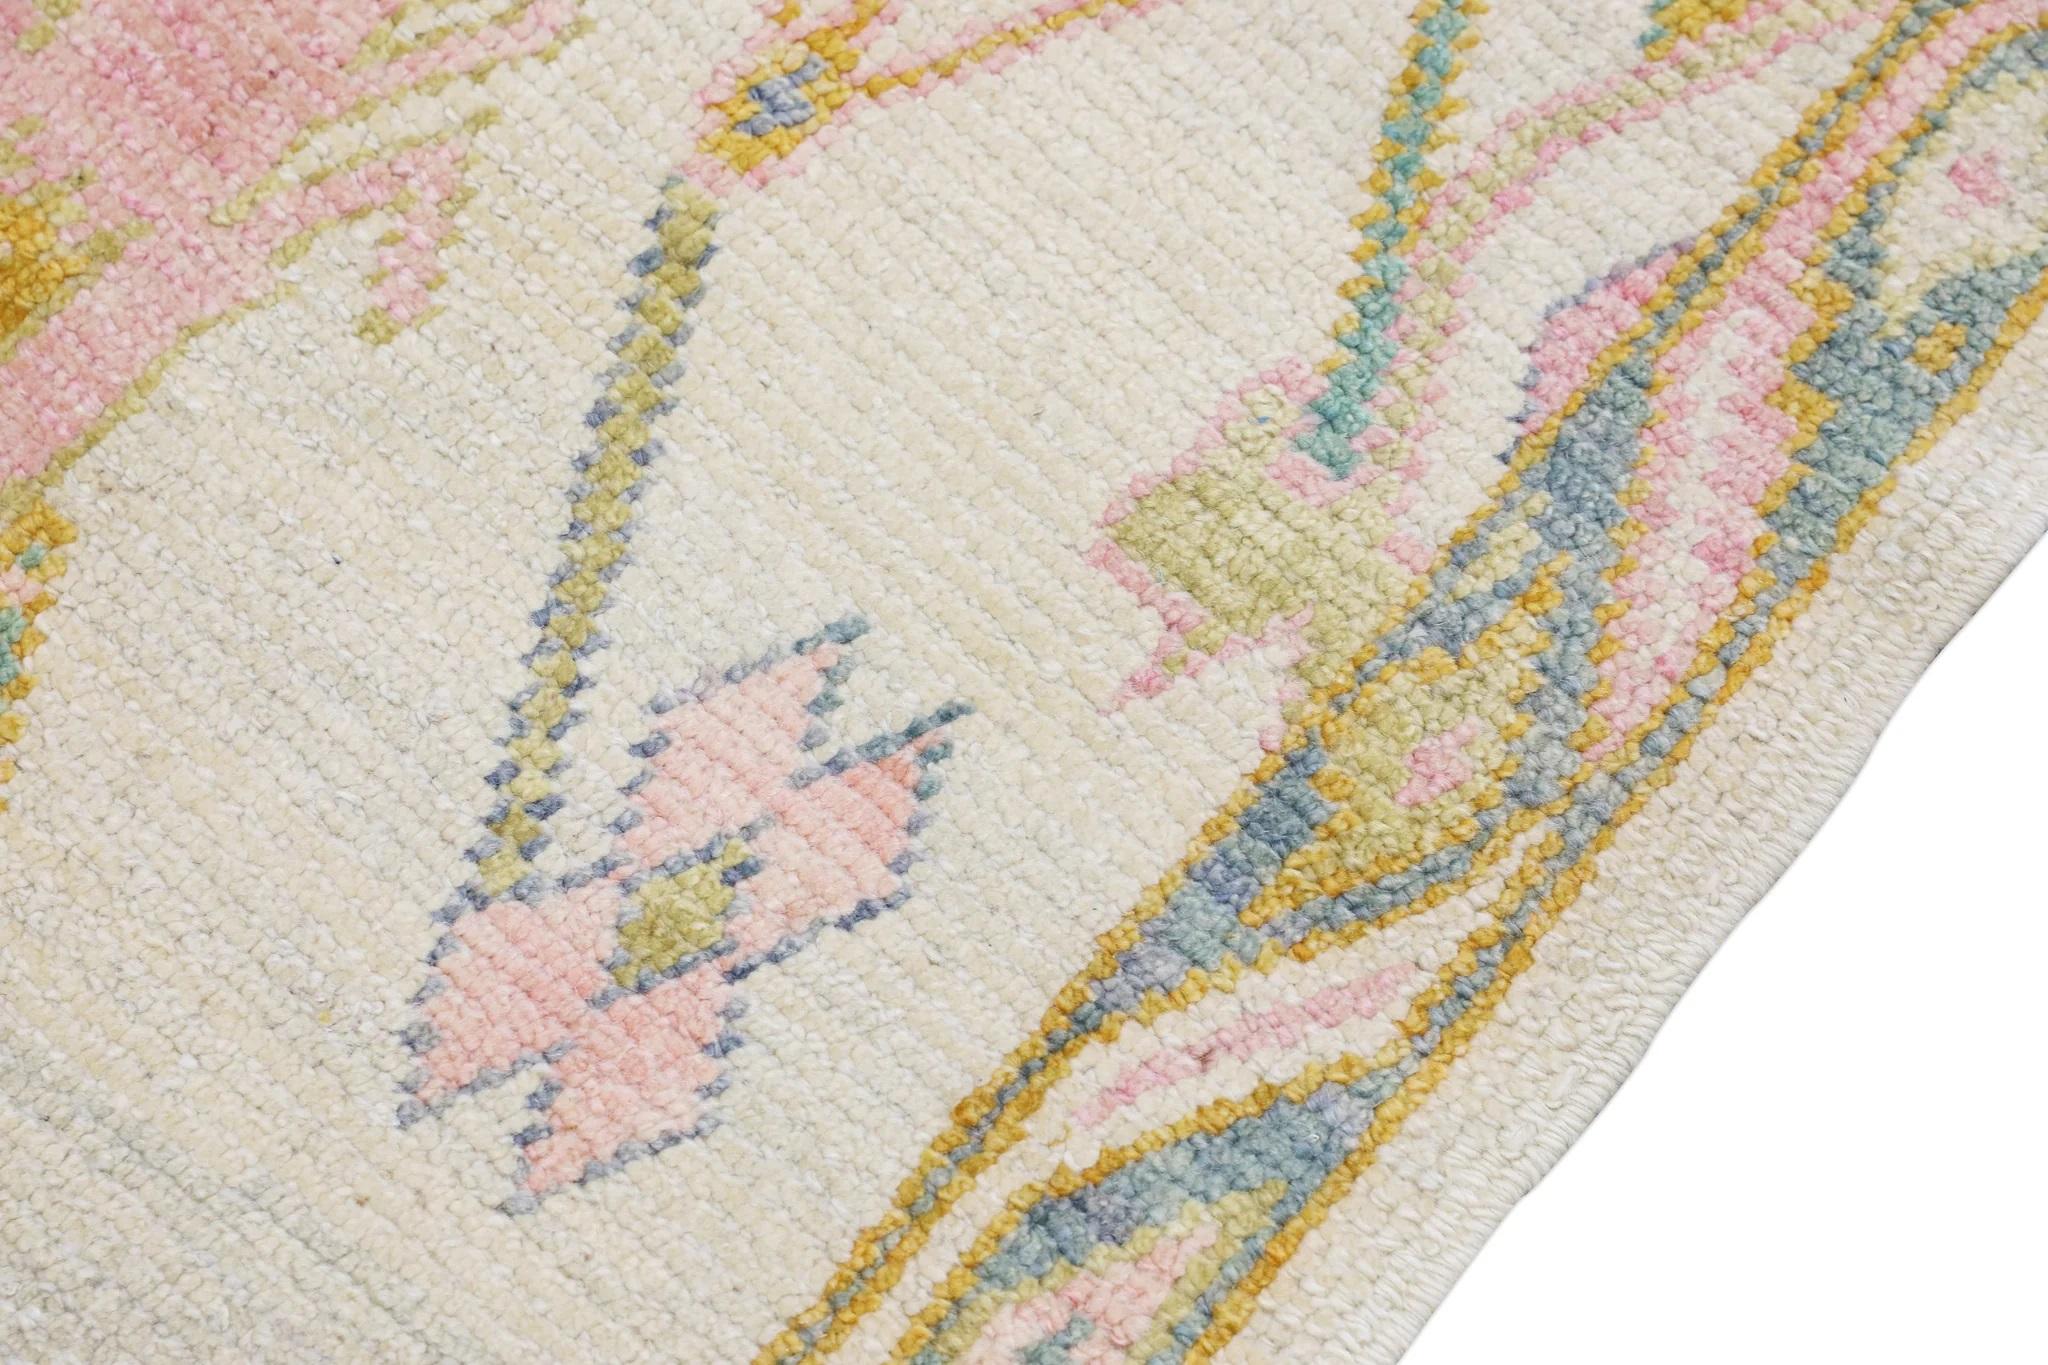 Hand-Woven Handwoven Wool Turkish Oushak Rug in Colorful Geometric Floral Pattern 2'9 x 9'3